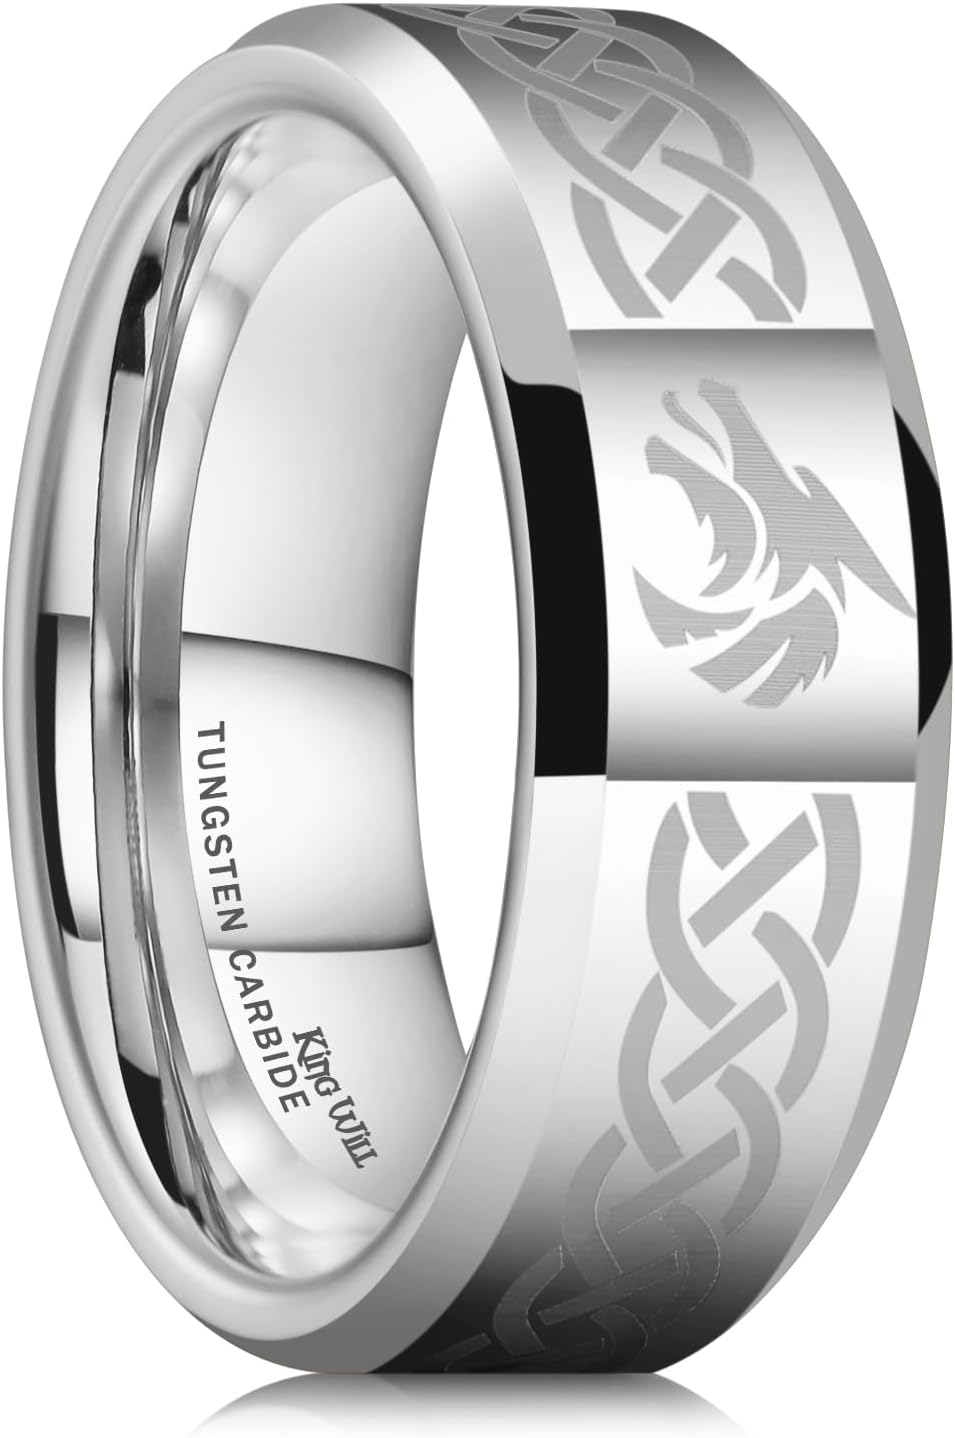 King Will 8mm Black/Silver/Blue Mens Tungsten Carbide Ring Laser Celtic Knot/Wolf Head/Dragon Polish Edge Wedding Band Size 7-14